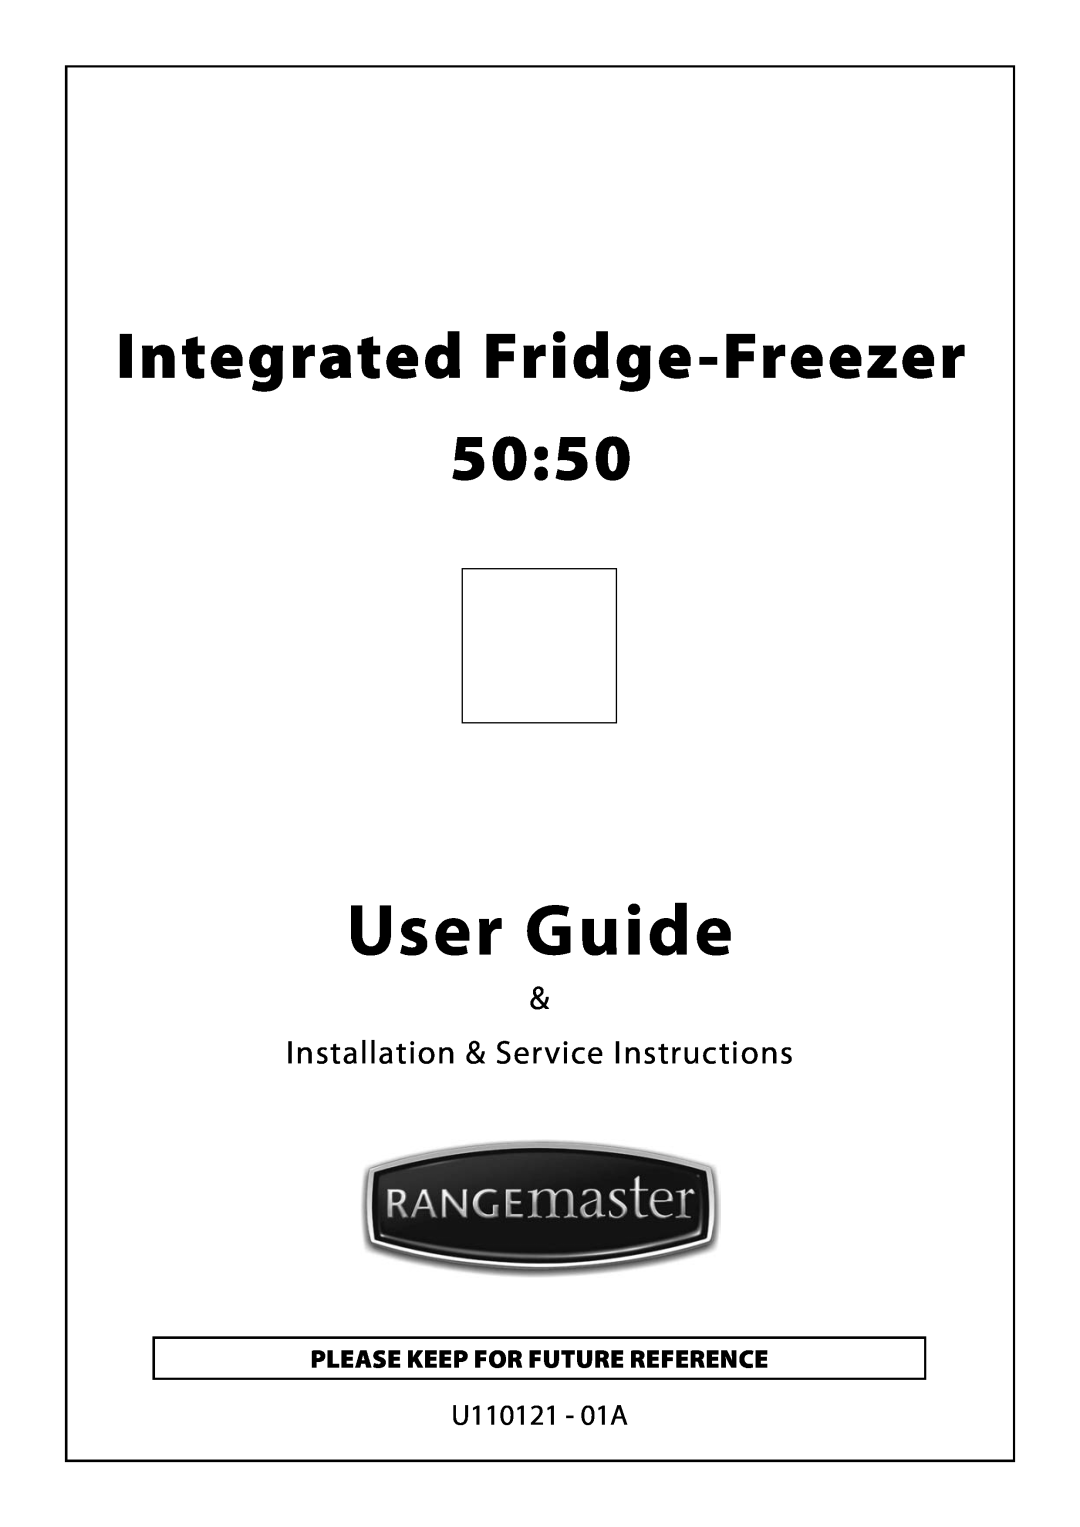 Rangemaster U110121 - 01A manual Please keeP For Future reFerence, User Guide, Integrated Fridge-Freezer, 5050 